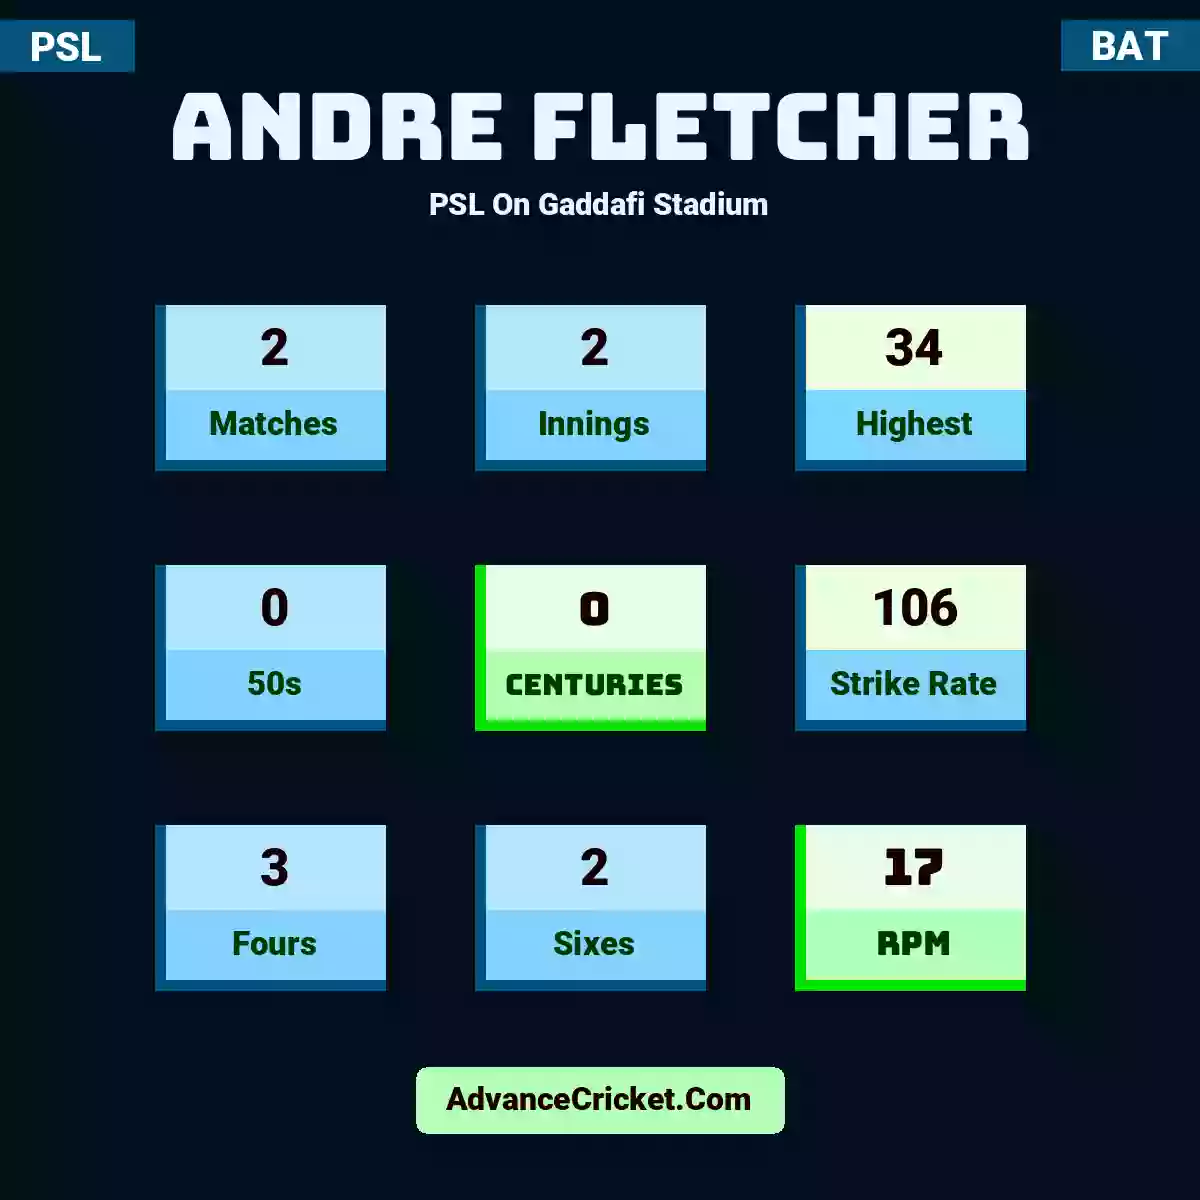 Andre Fletcher PSL  On Gaddafi Stadium, Andre Fletcher played 2 matches, scored 34 runs as highest, 0 half-centuries, and 0 centuries, with a strike rate of 106. A.Fletcher hit 3 fours and 2 sixes, with an RPM of 17.